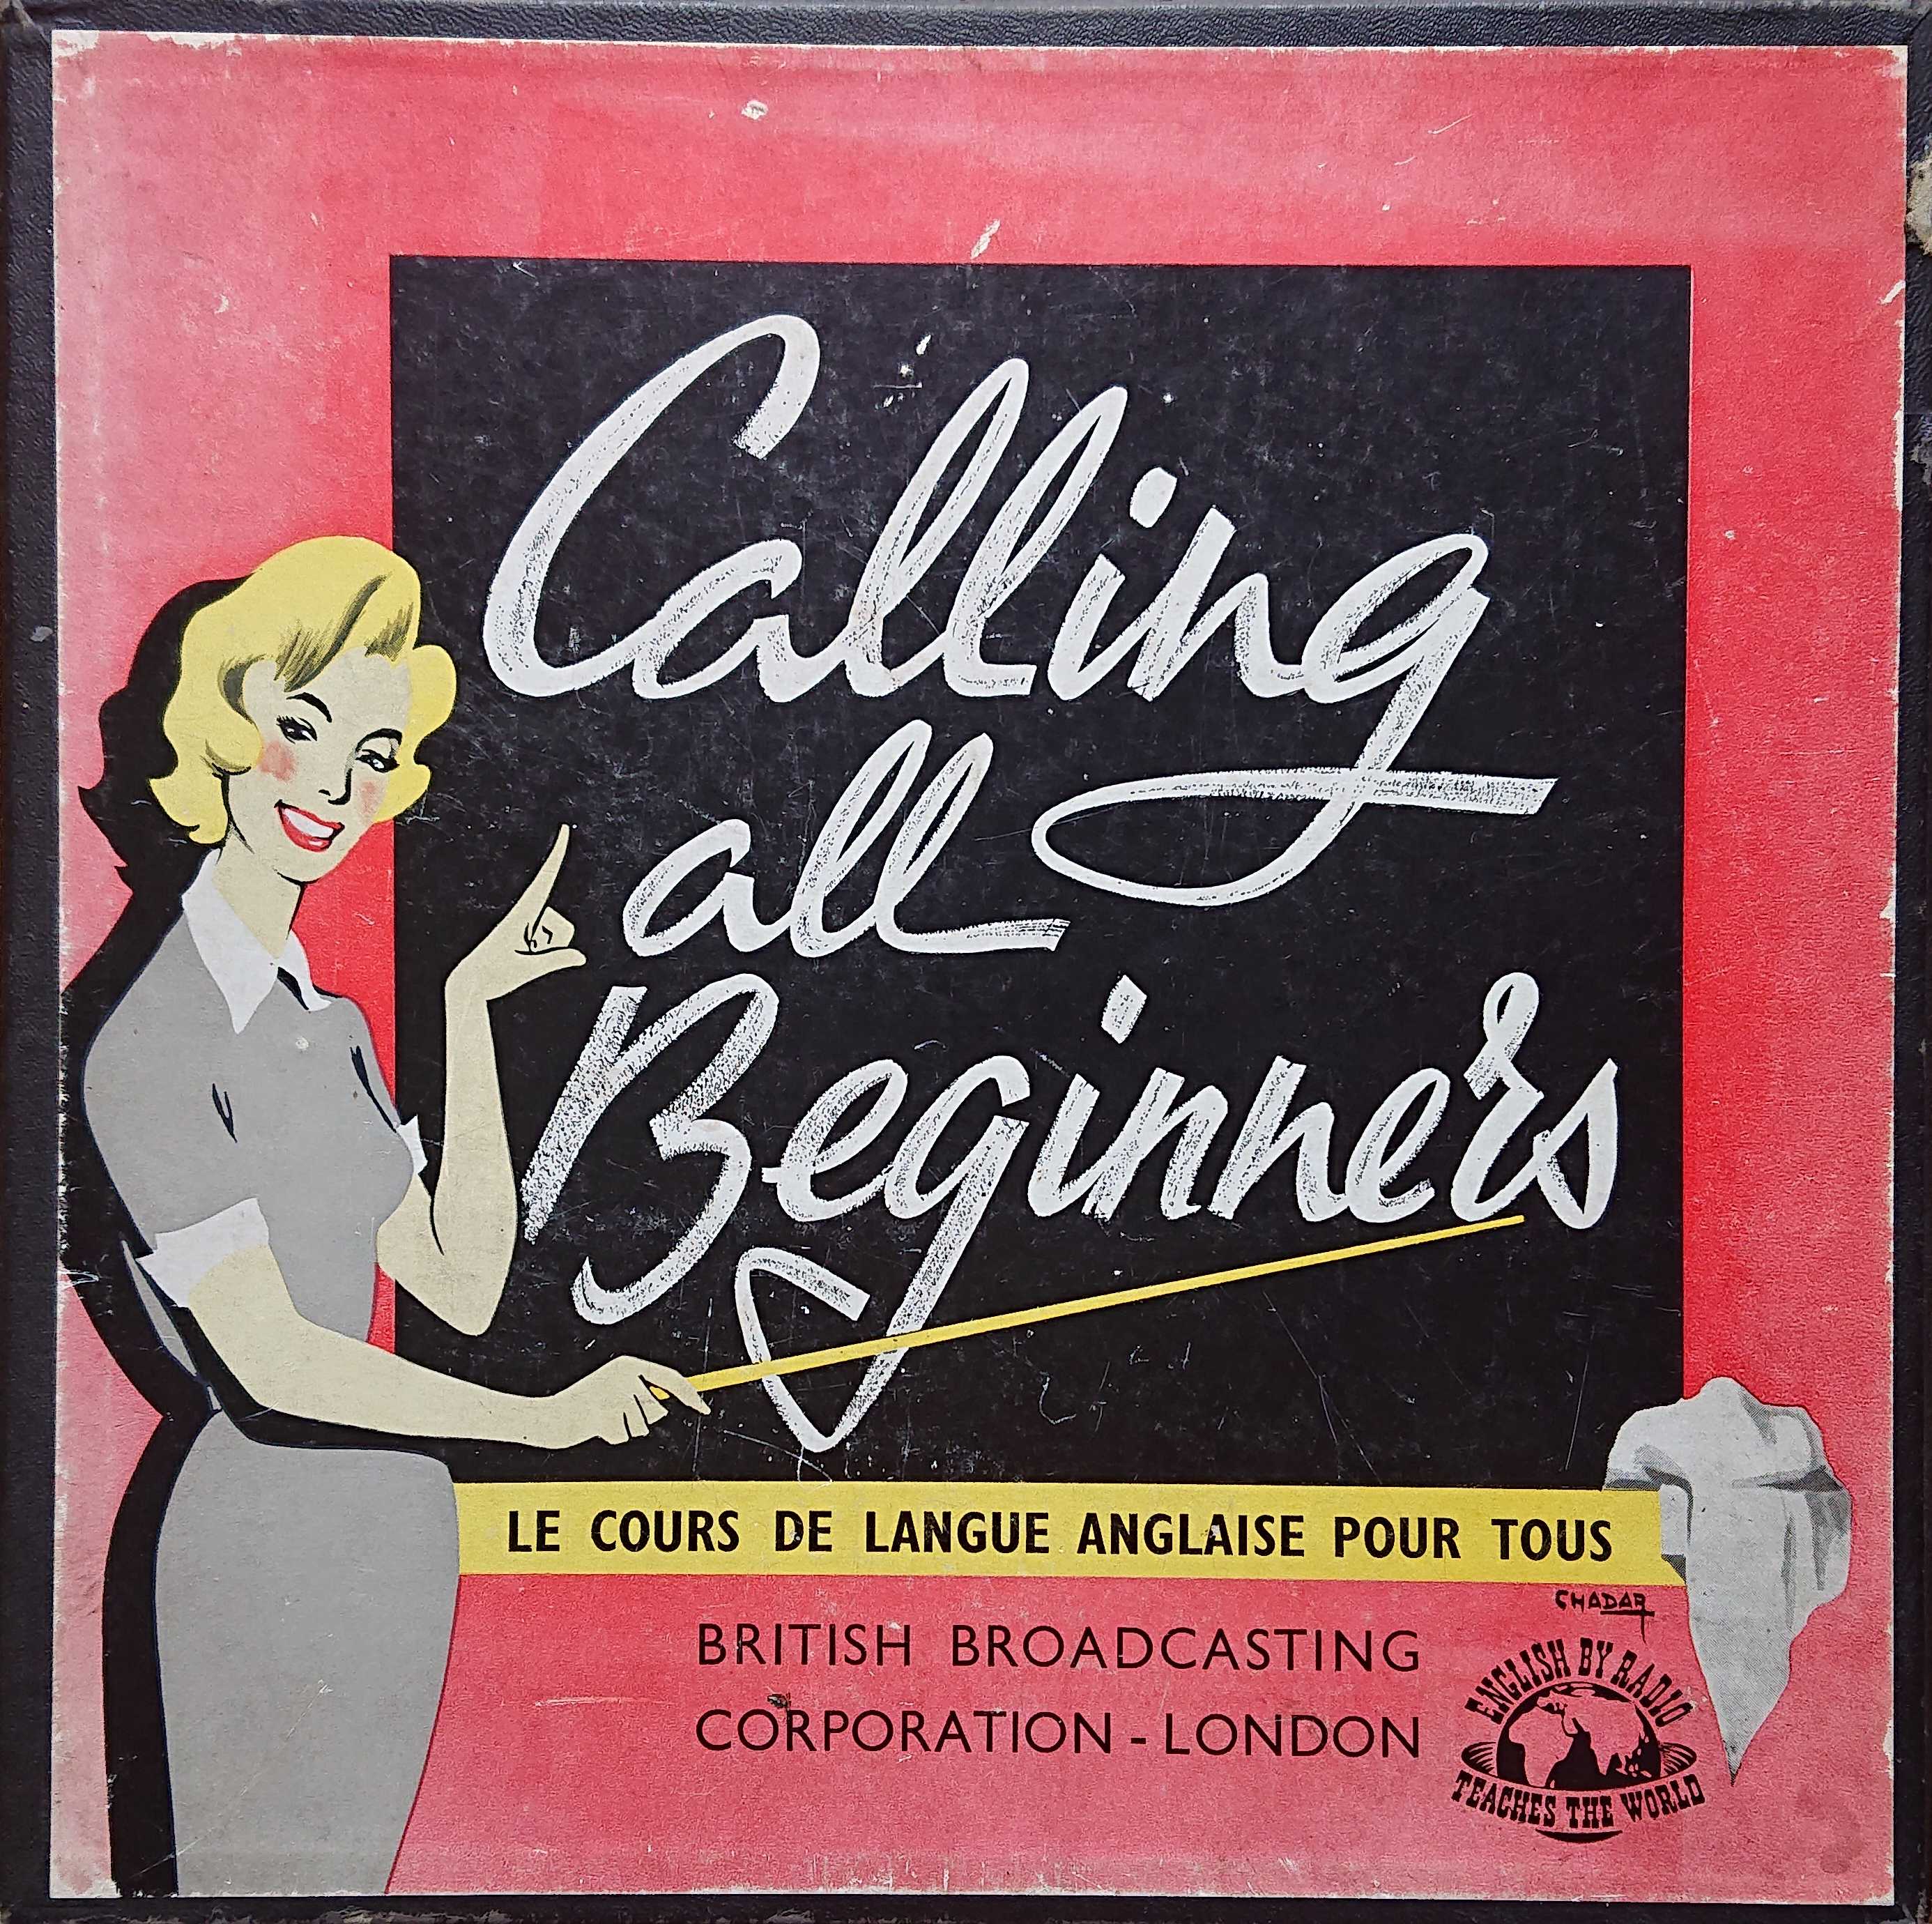 Picture of CAB 1-4 DU Calling all beginners by artist Various from the BBC 10inches - Records and Tapes library